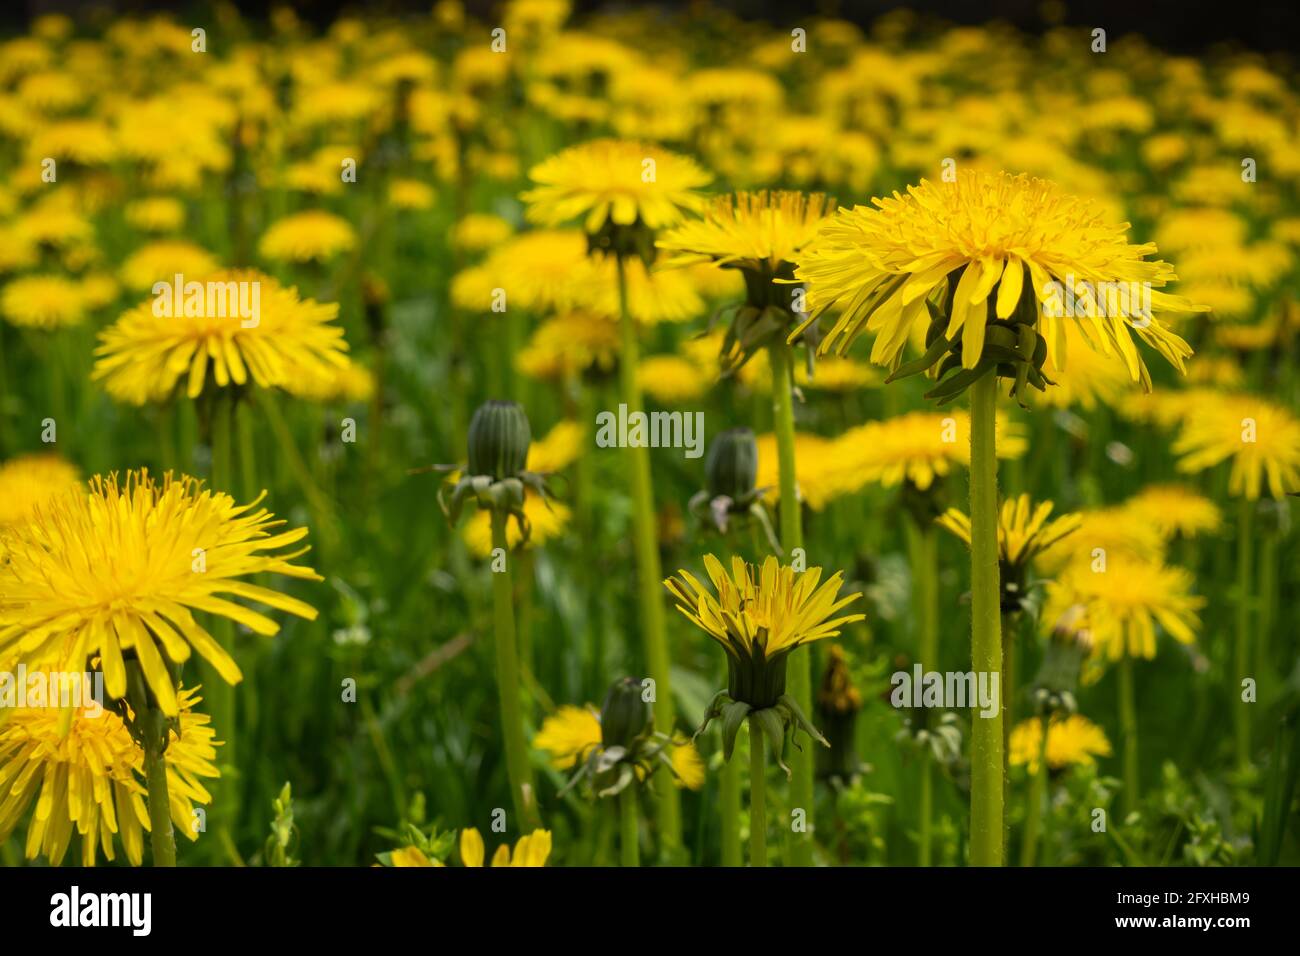 Lots of yellow flowers of Dandelion (Taraxacum officinale) on a green meadow. Photo taken with natural, soft light. Stock Photo